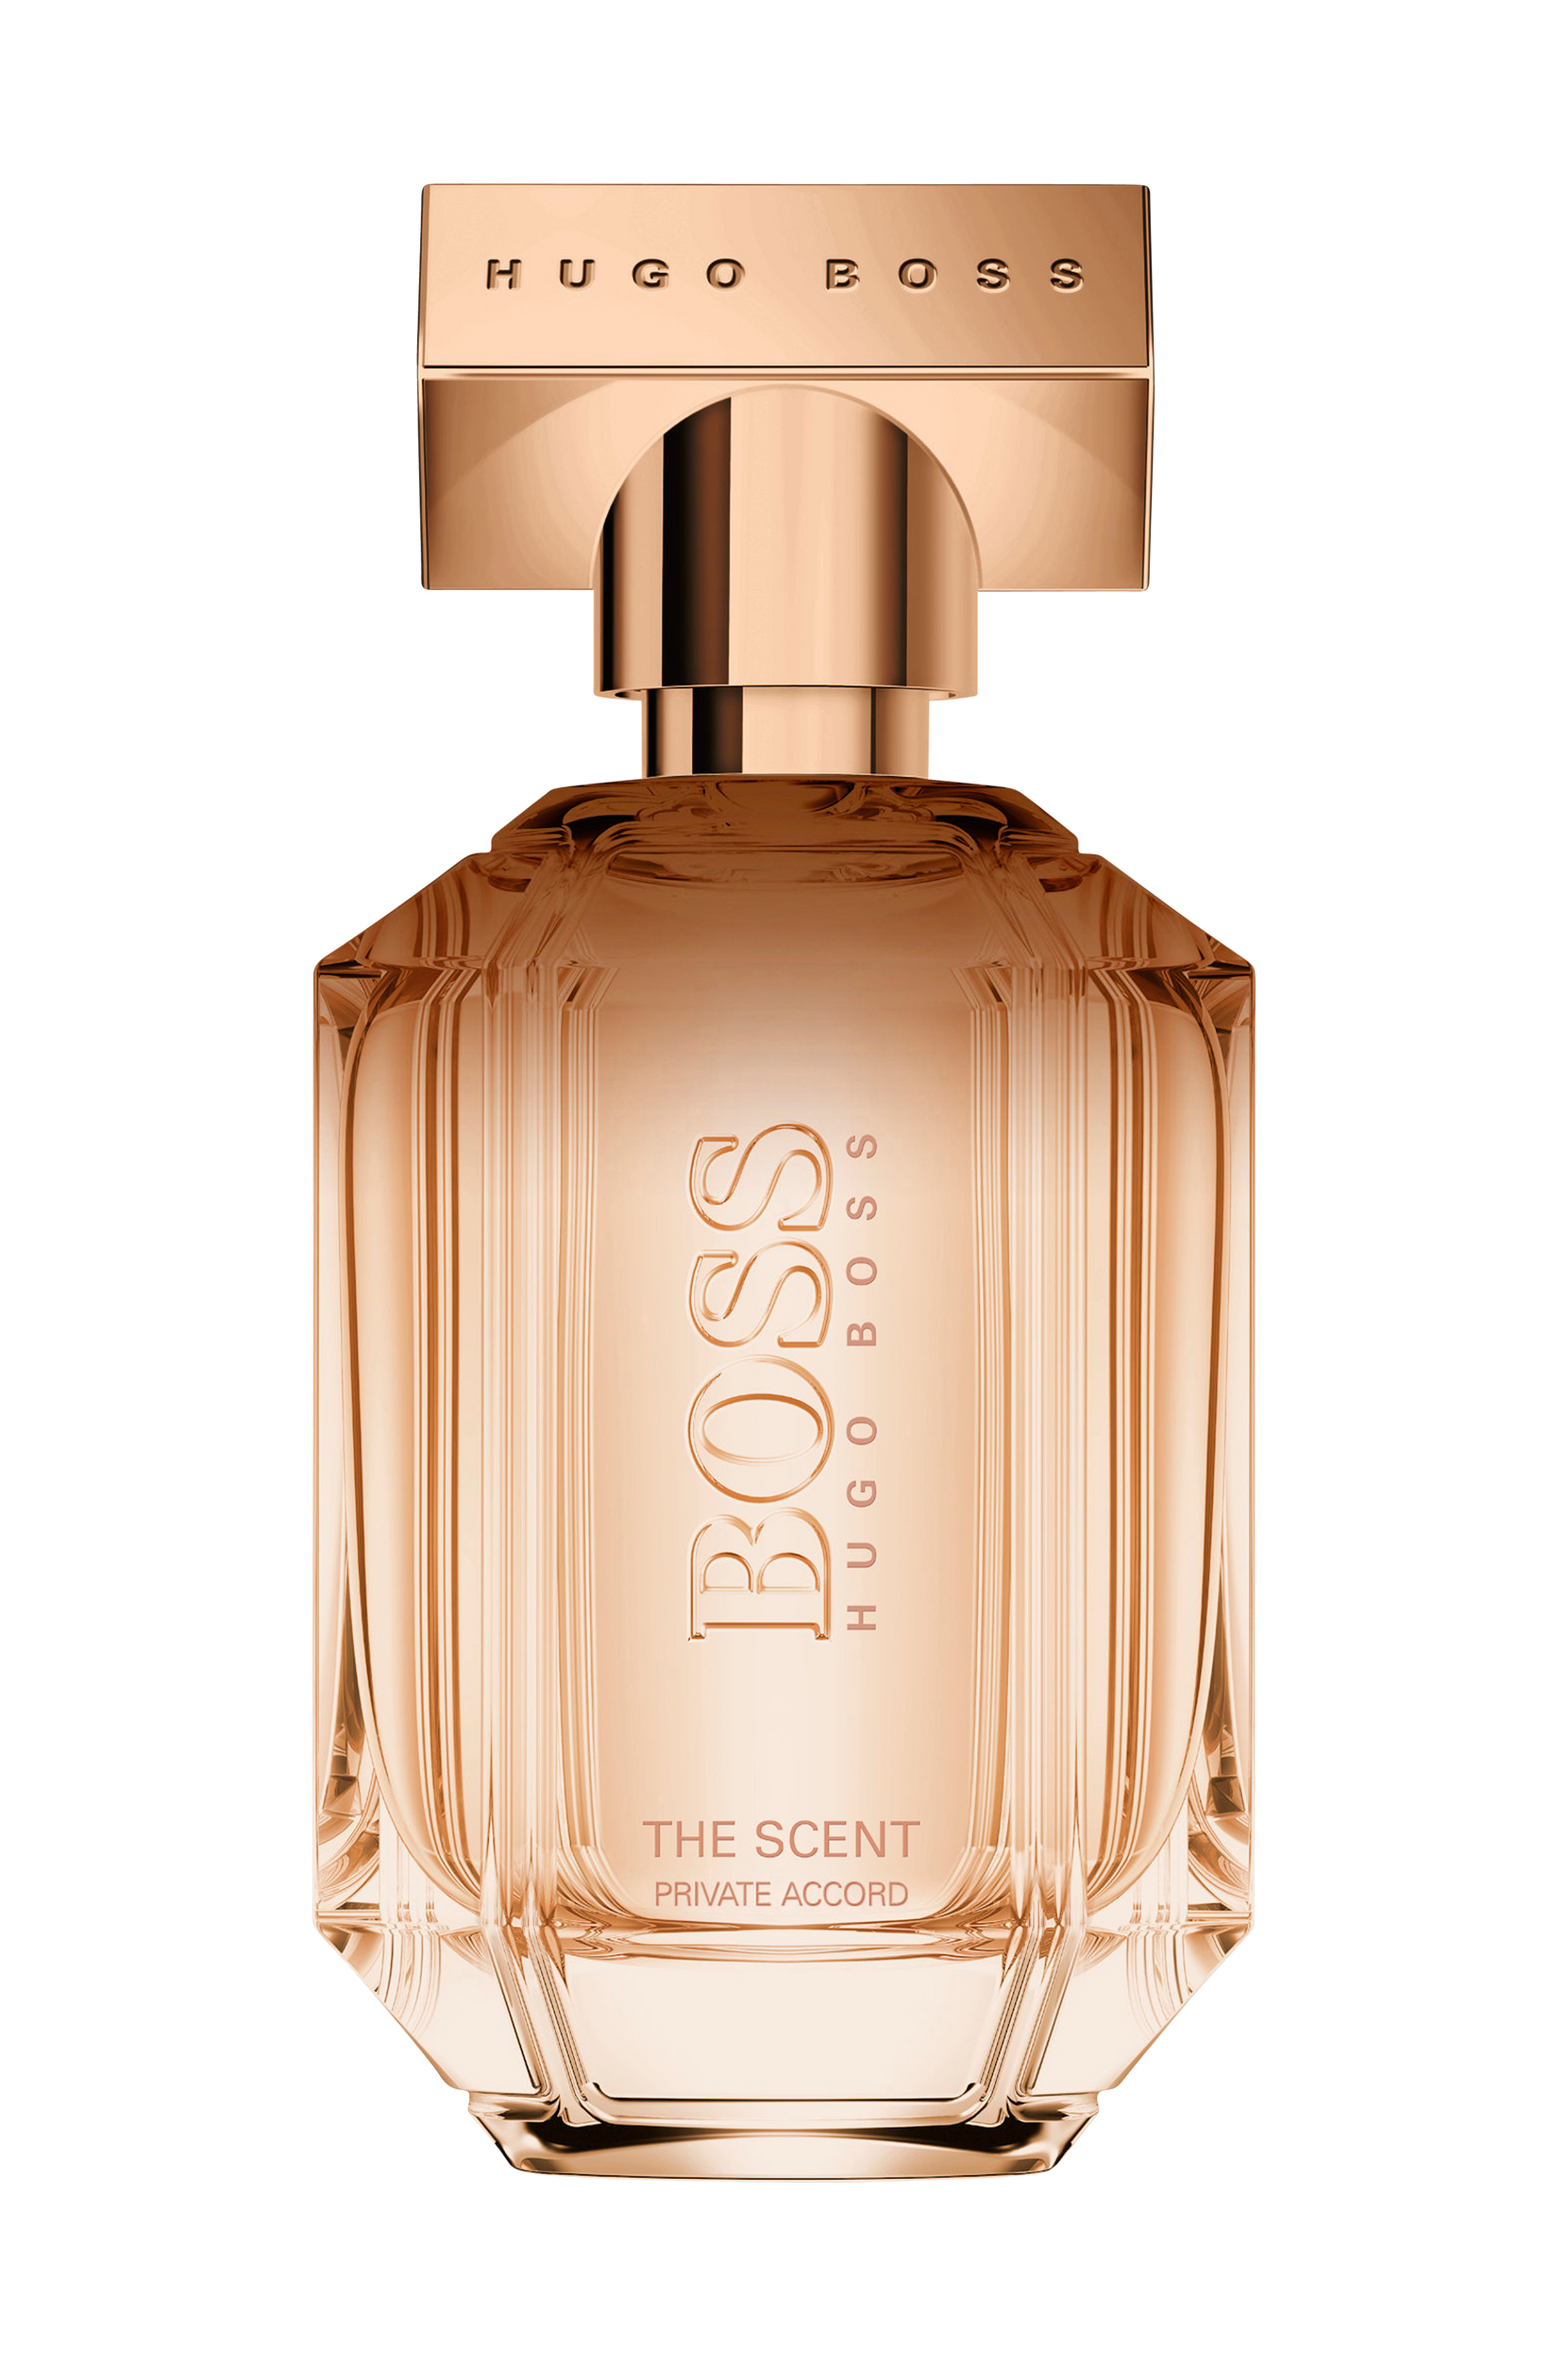 The Scent For Her Private Accord EdP 50 ml, Hugo Boss